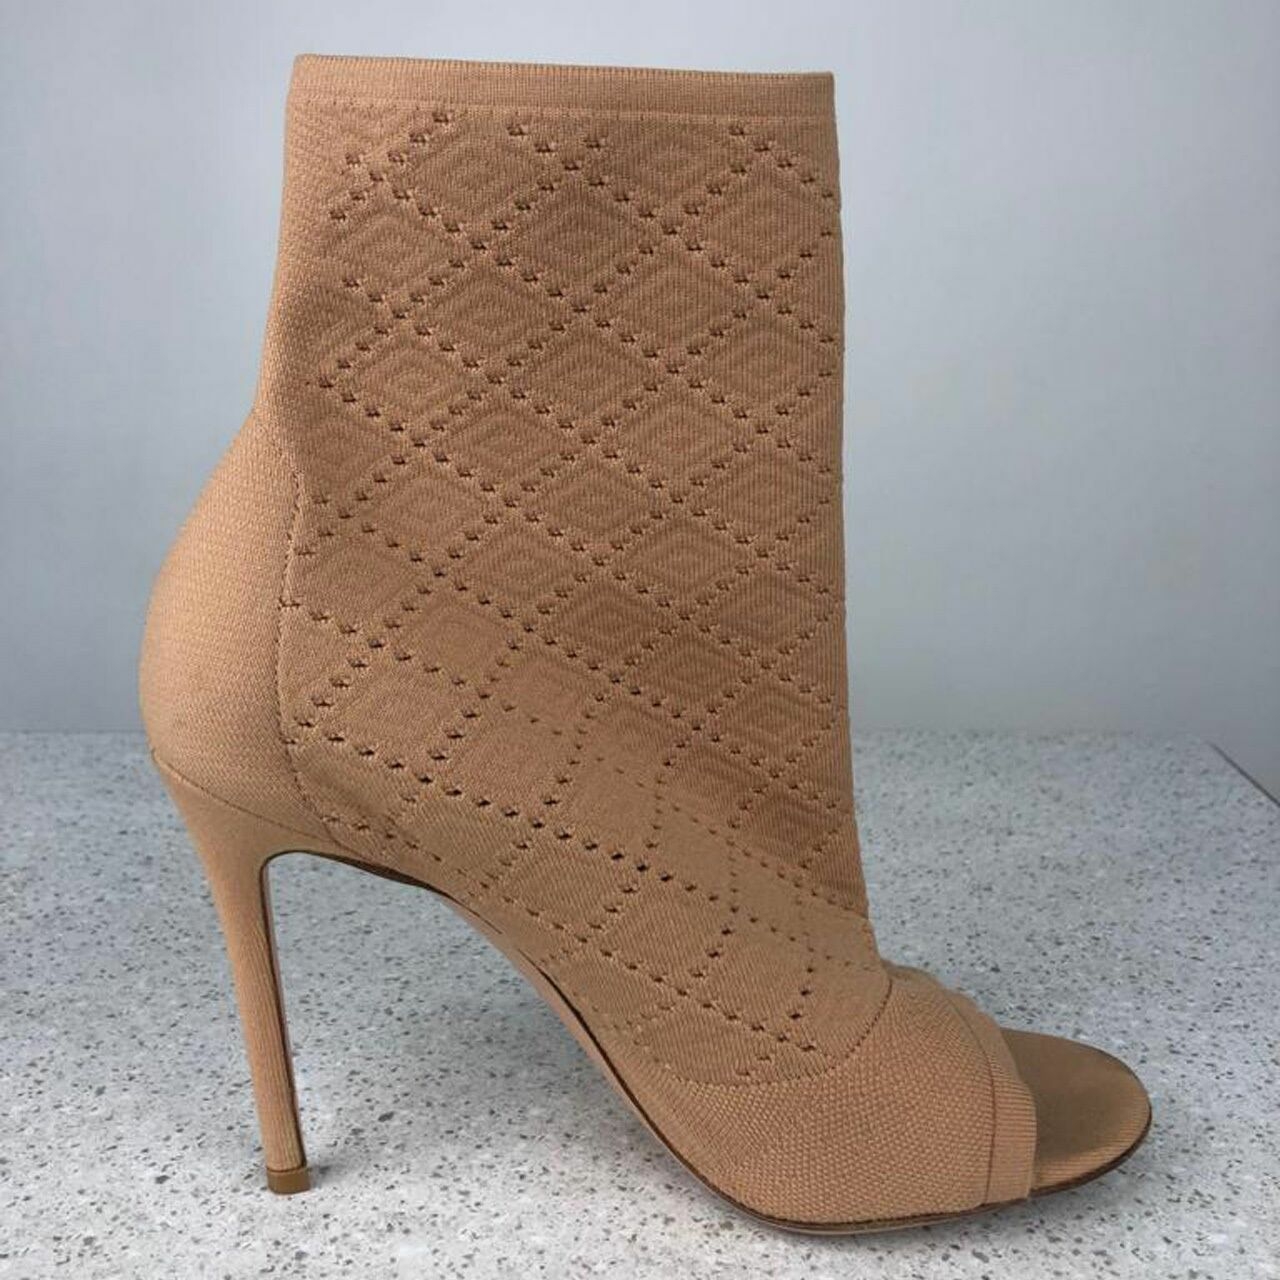 Gianvito Rossi Stretch Knit Booties Beige Open Toe High Heels Ankle Boots 